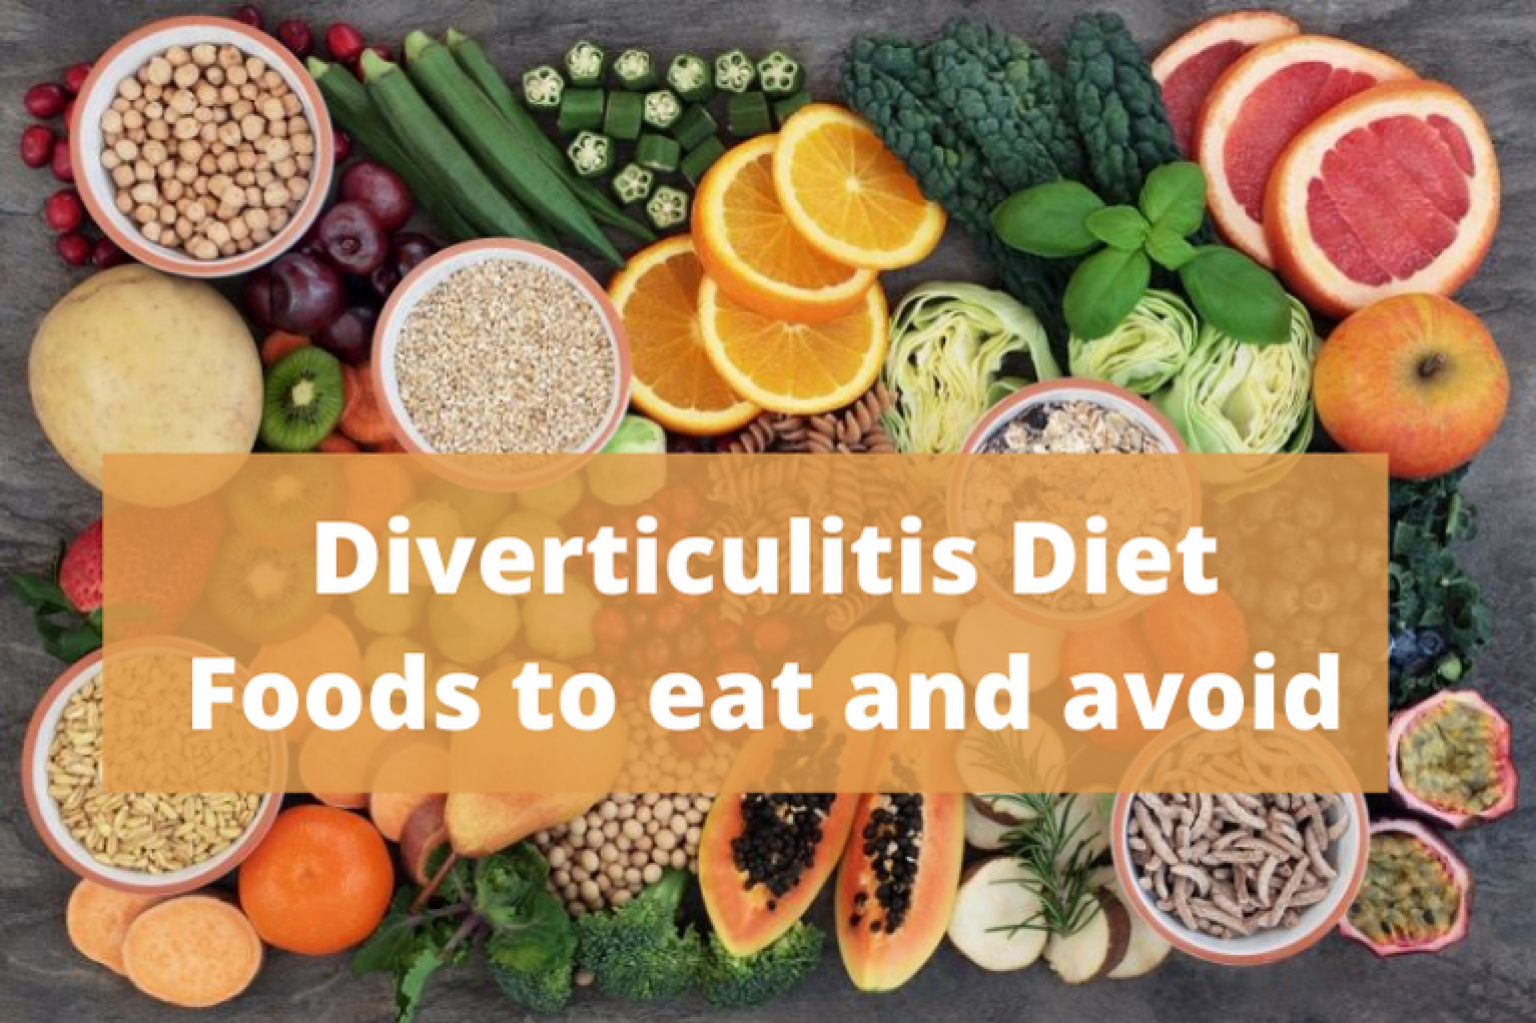 Diverticulitis Diet - Food to eat and avoid with Diverticulitis